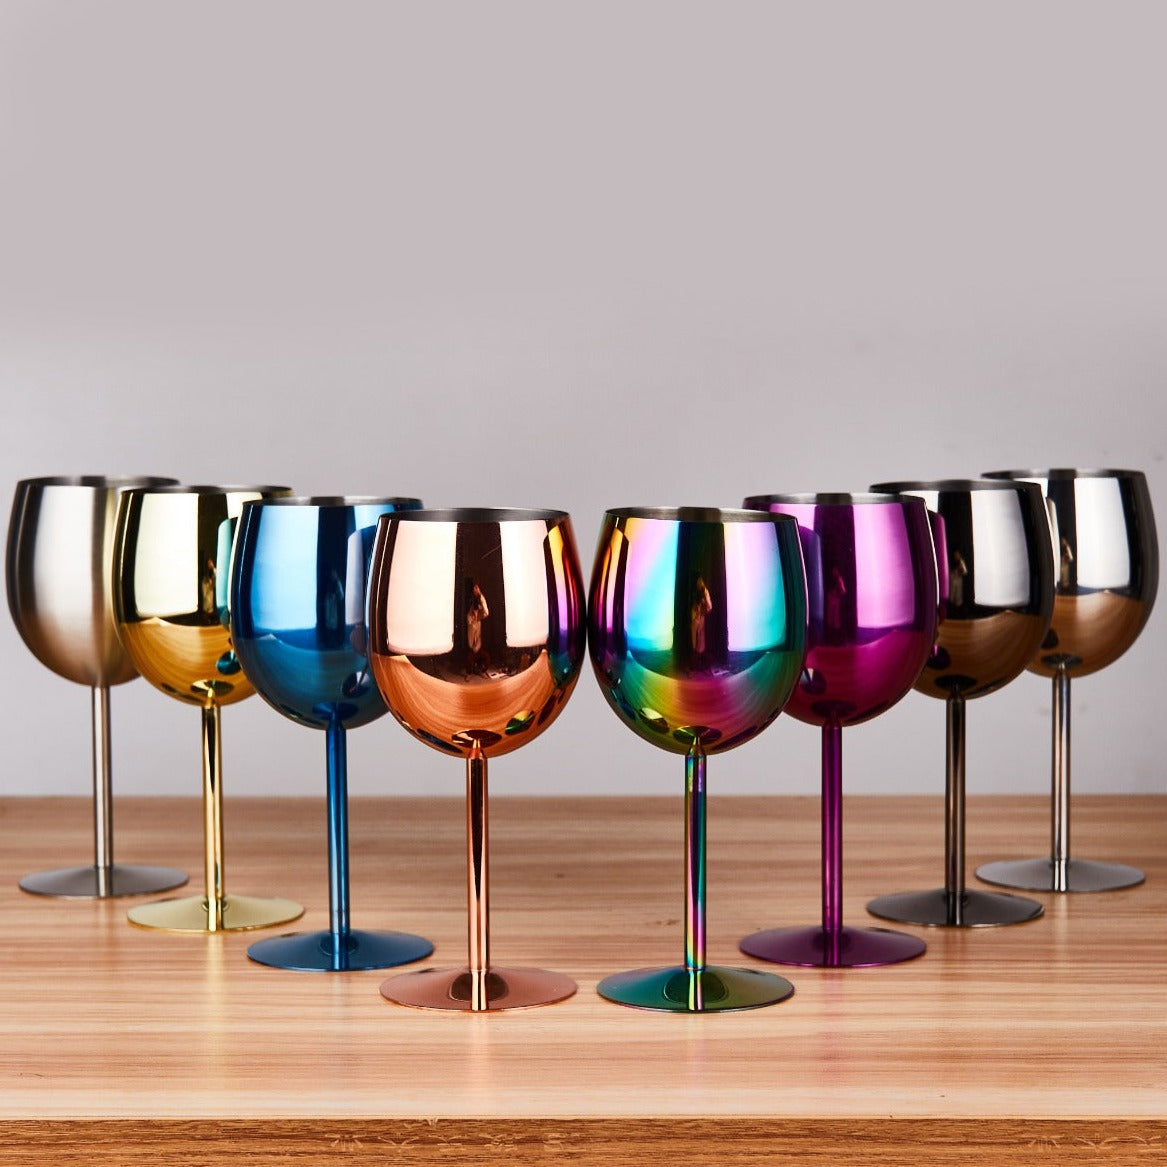 304 Stainless Steel Champagne Flutes Glasses | 304 Stainless Steel Wine  Glasses Cup - Glass - Aliexpress